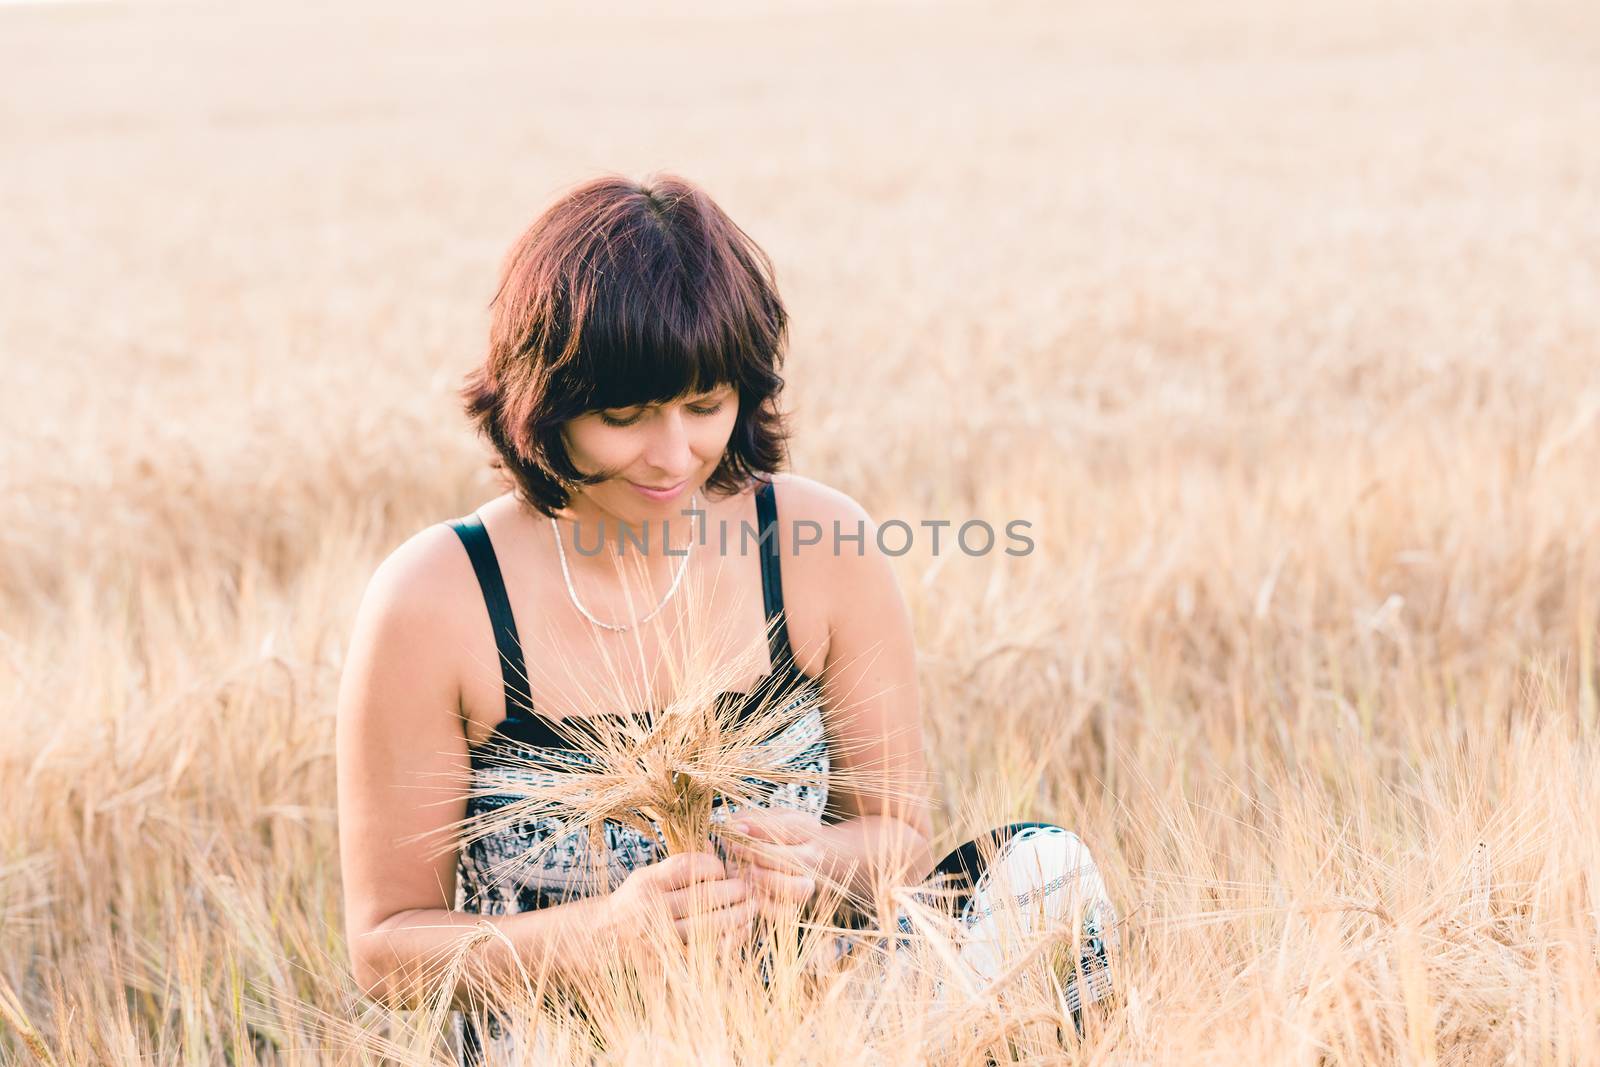 Middle aged beauty woman with summer dress and no makeup relaxing in countryside tearing into bouquet of golden barley with her hand, summer concept